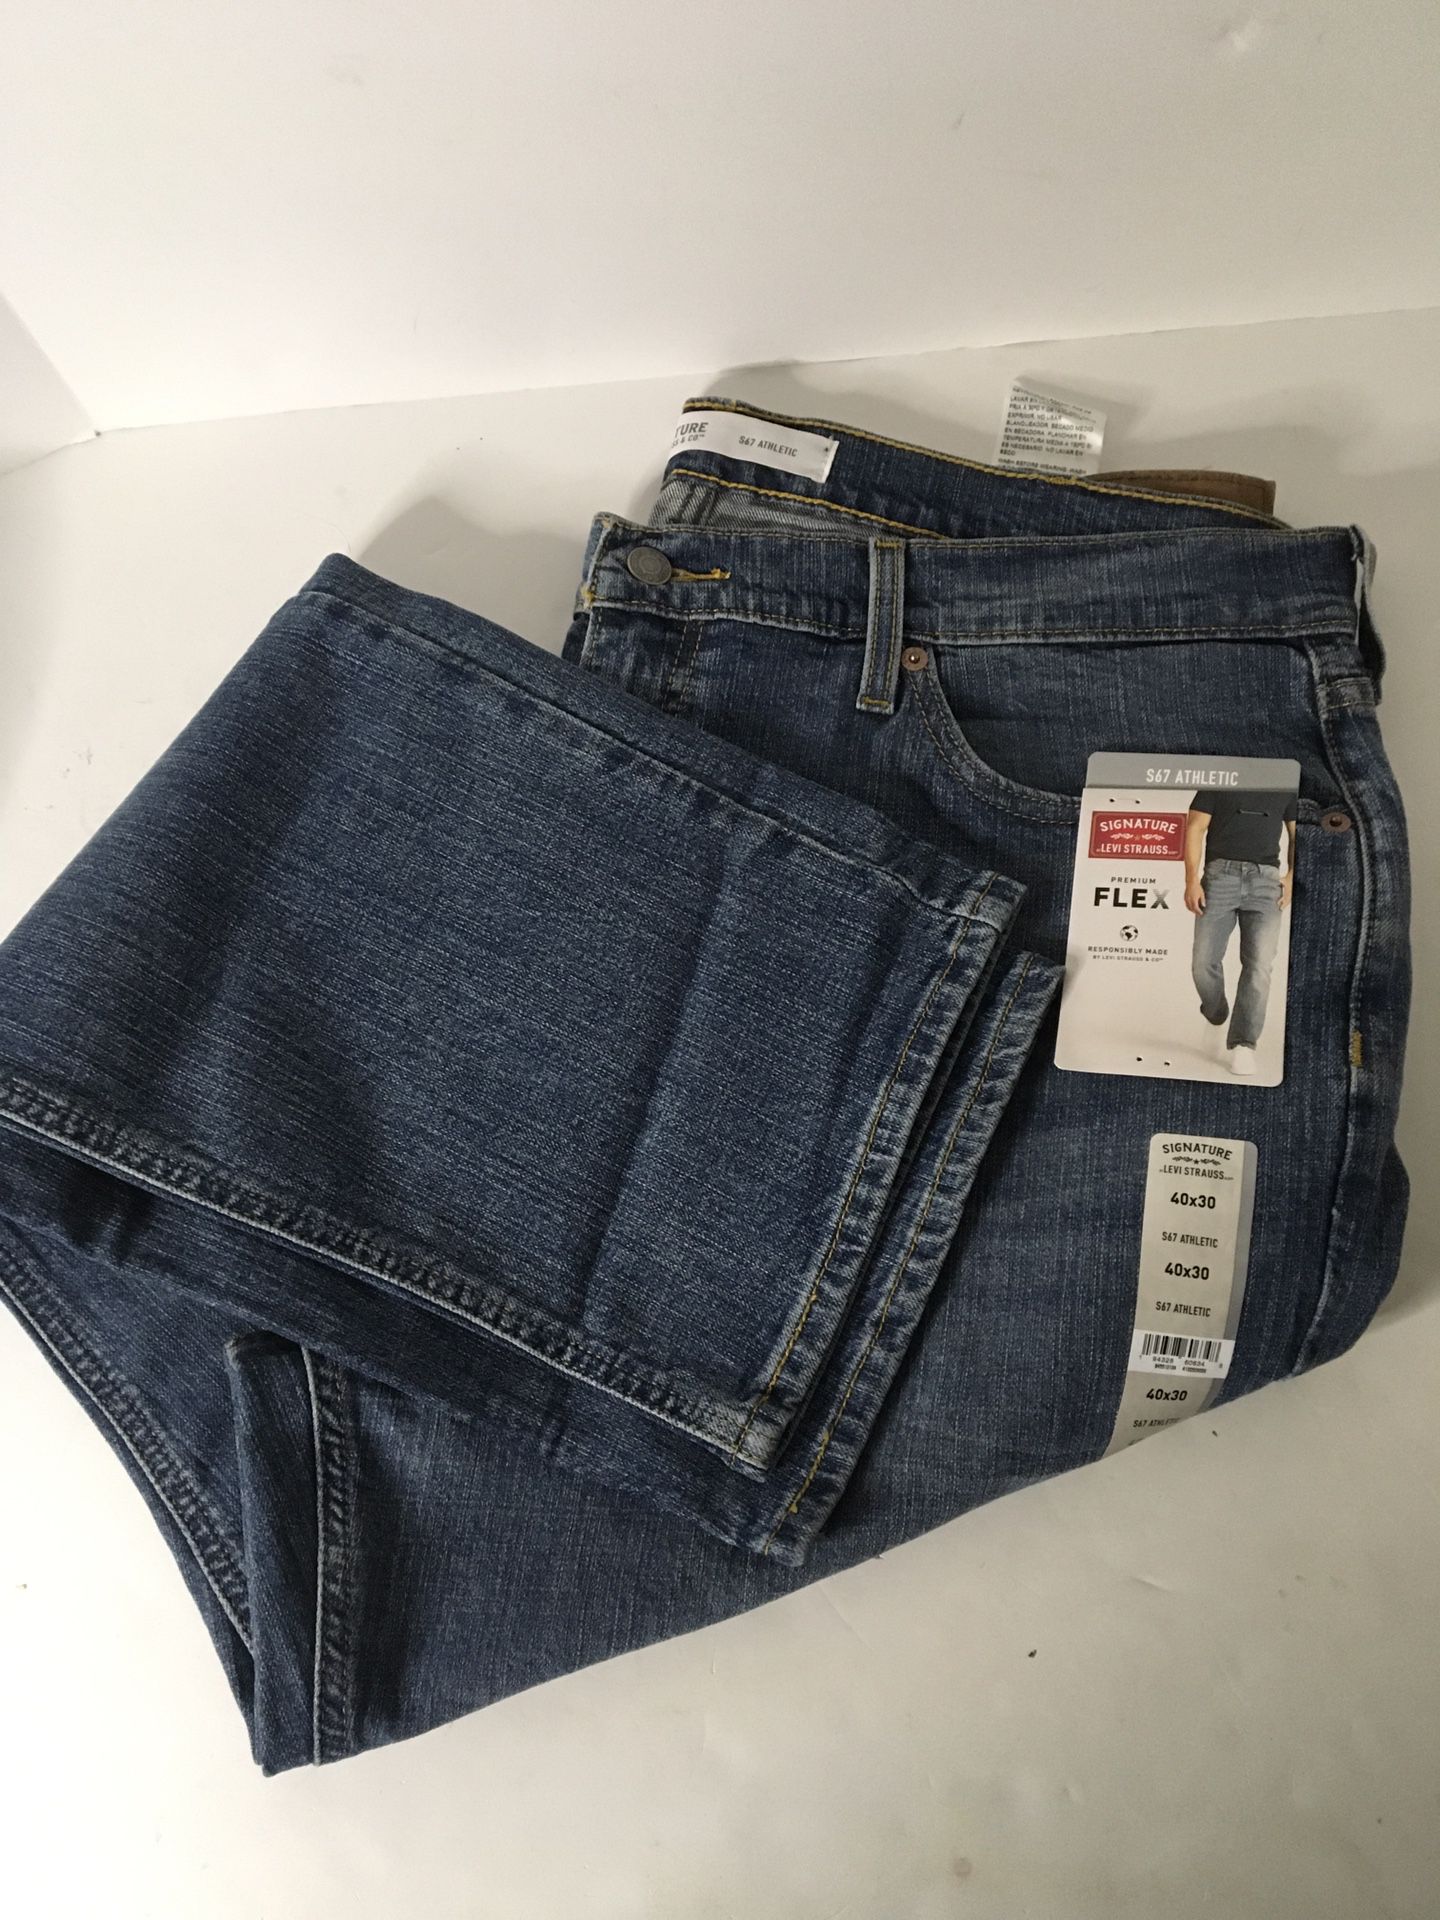 New Men's 40x30 Signature Levi Strauss Athletic Flex Fit Jeans for Sale in  La Marque, TX - OfferUp